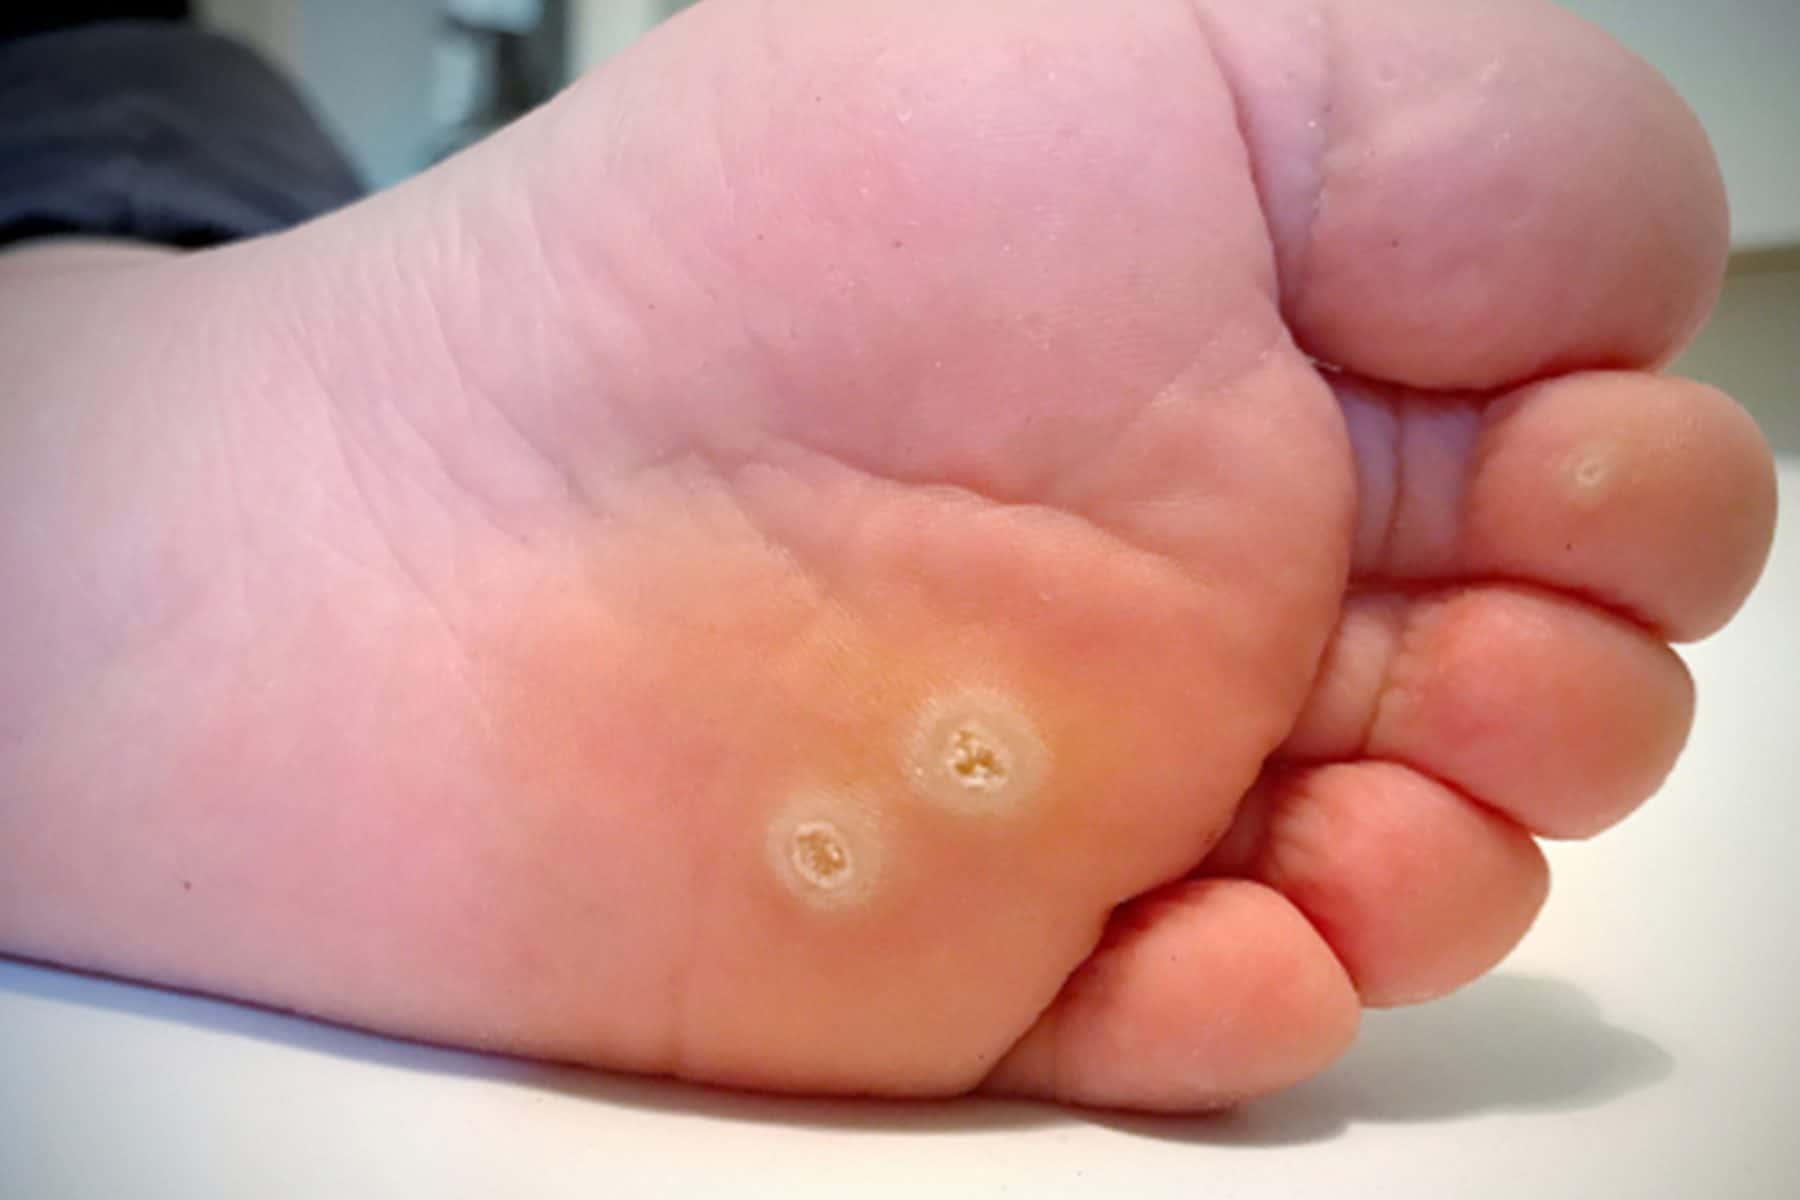 Hpv wart foot Wart on foot why